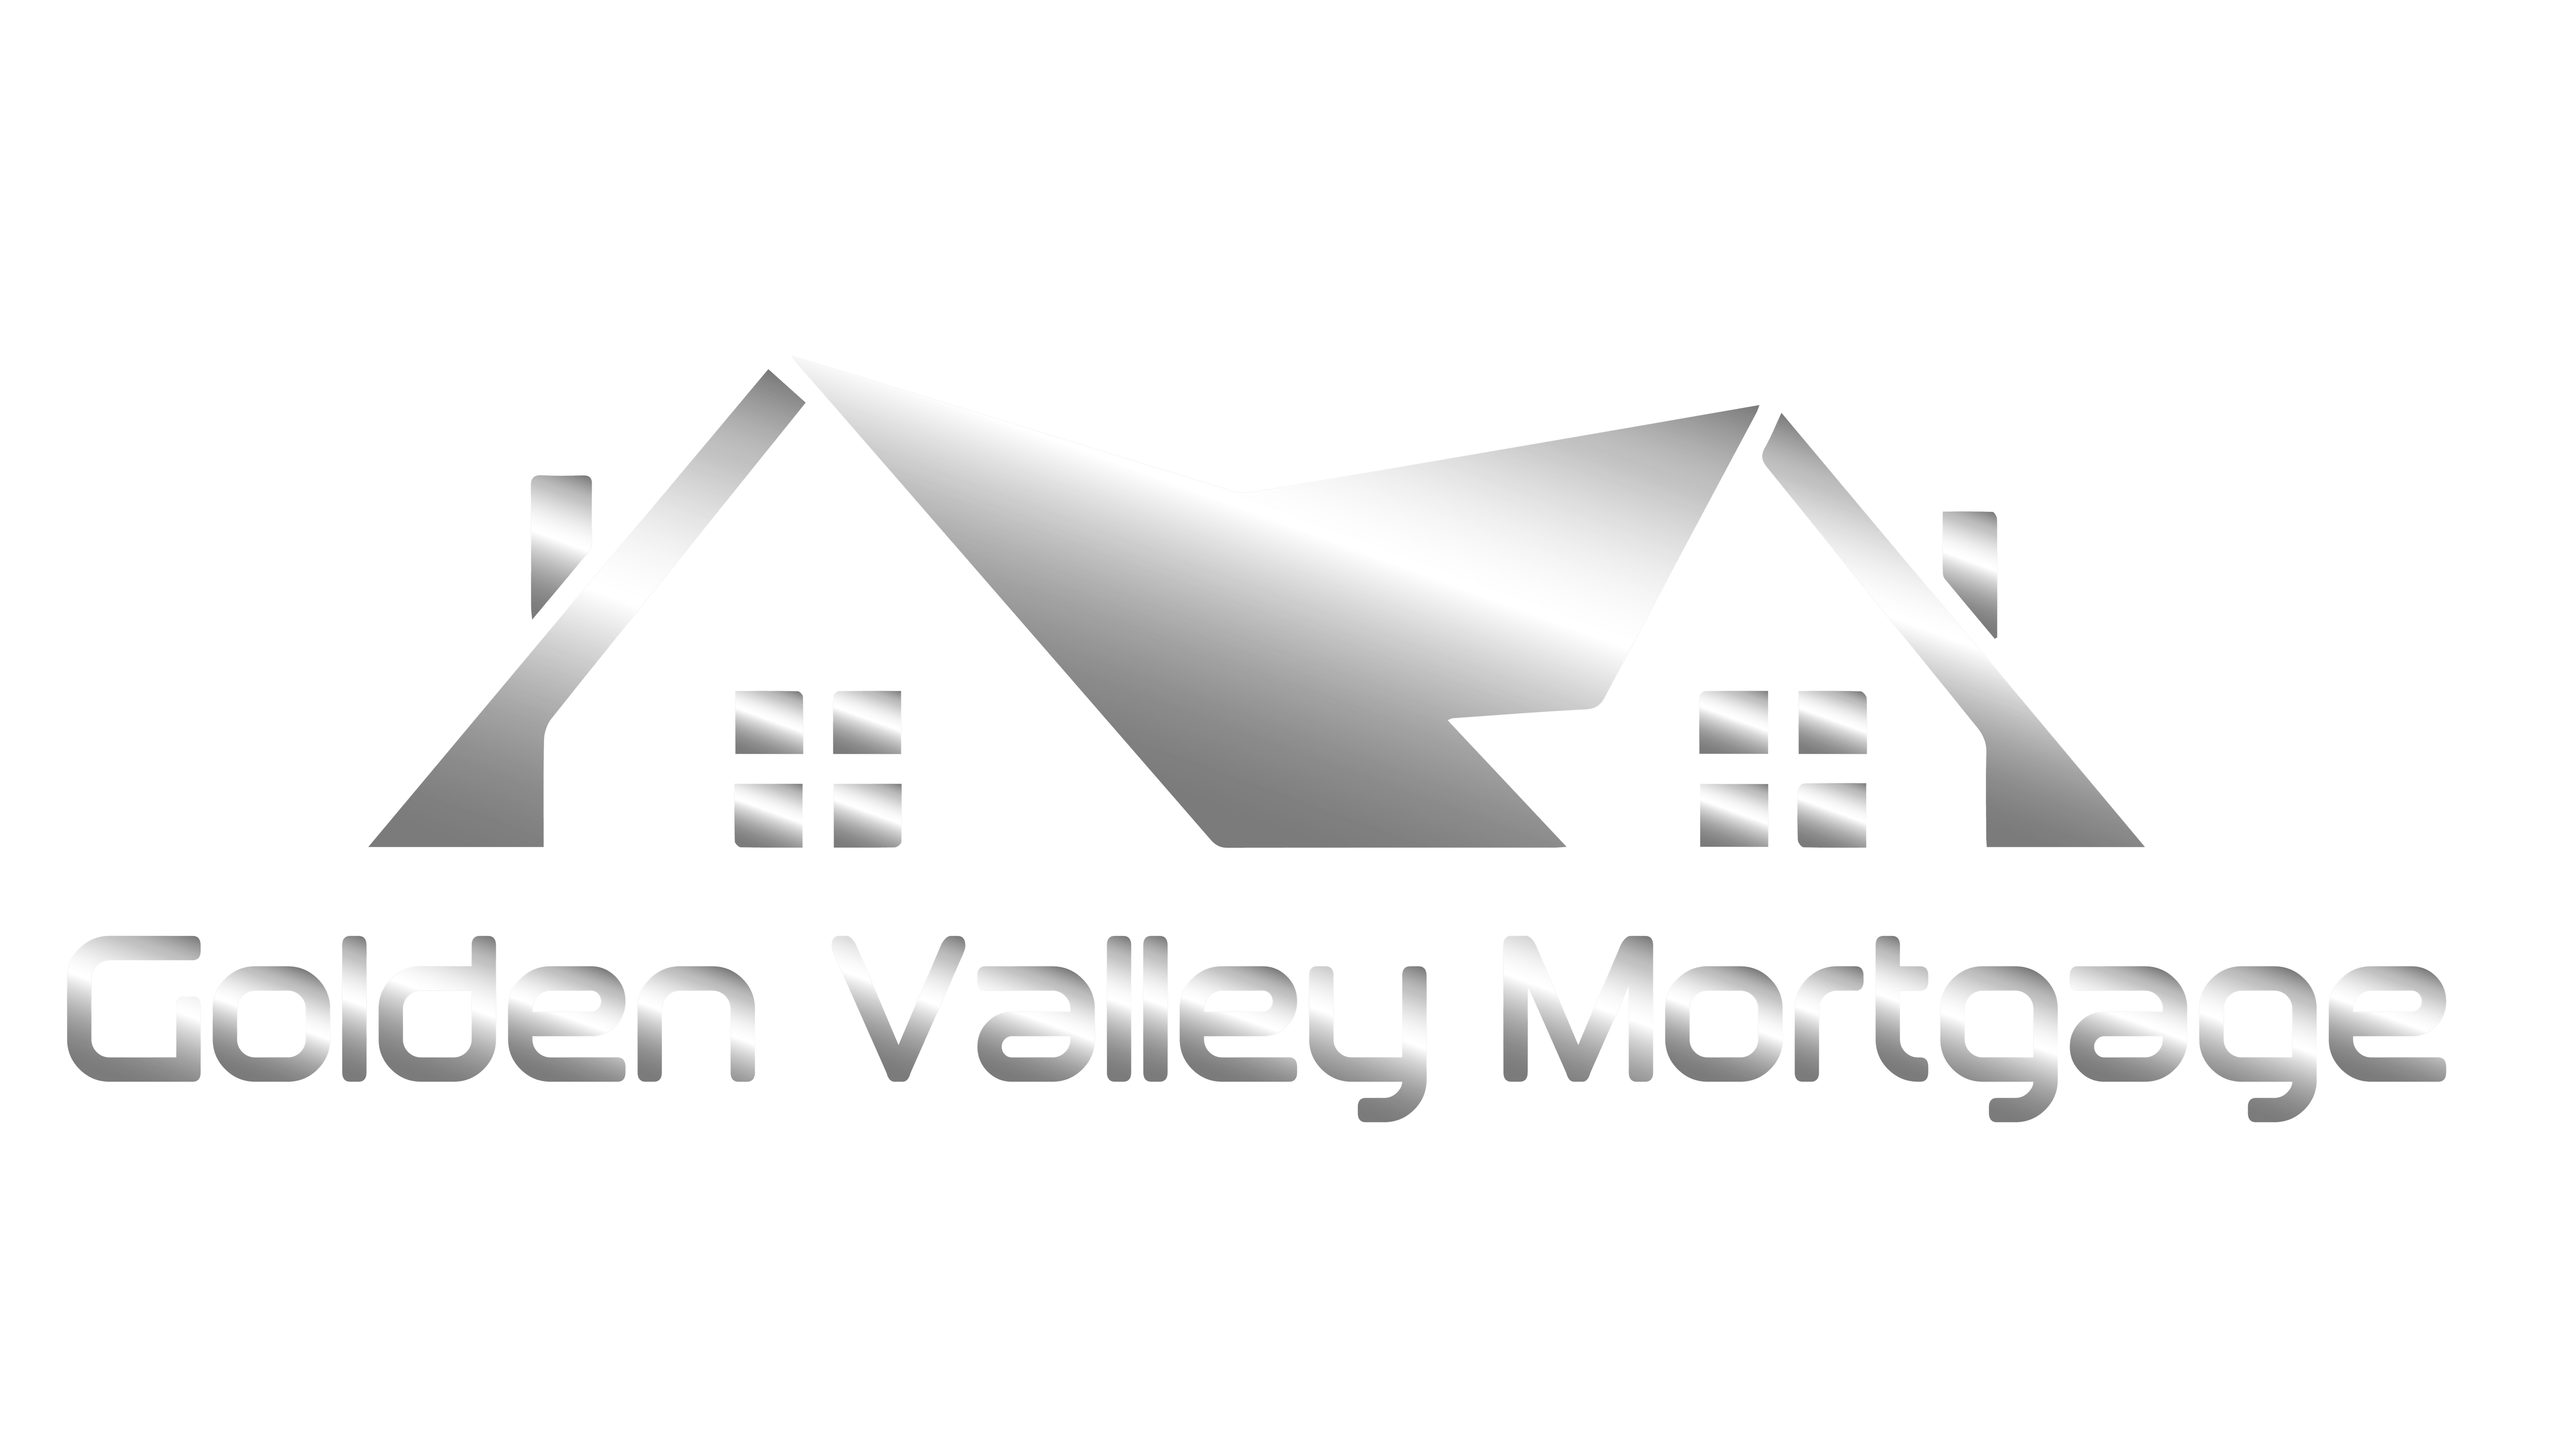 Golden Valley Mortgage